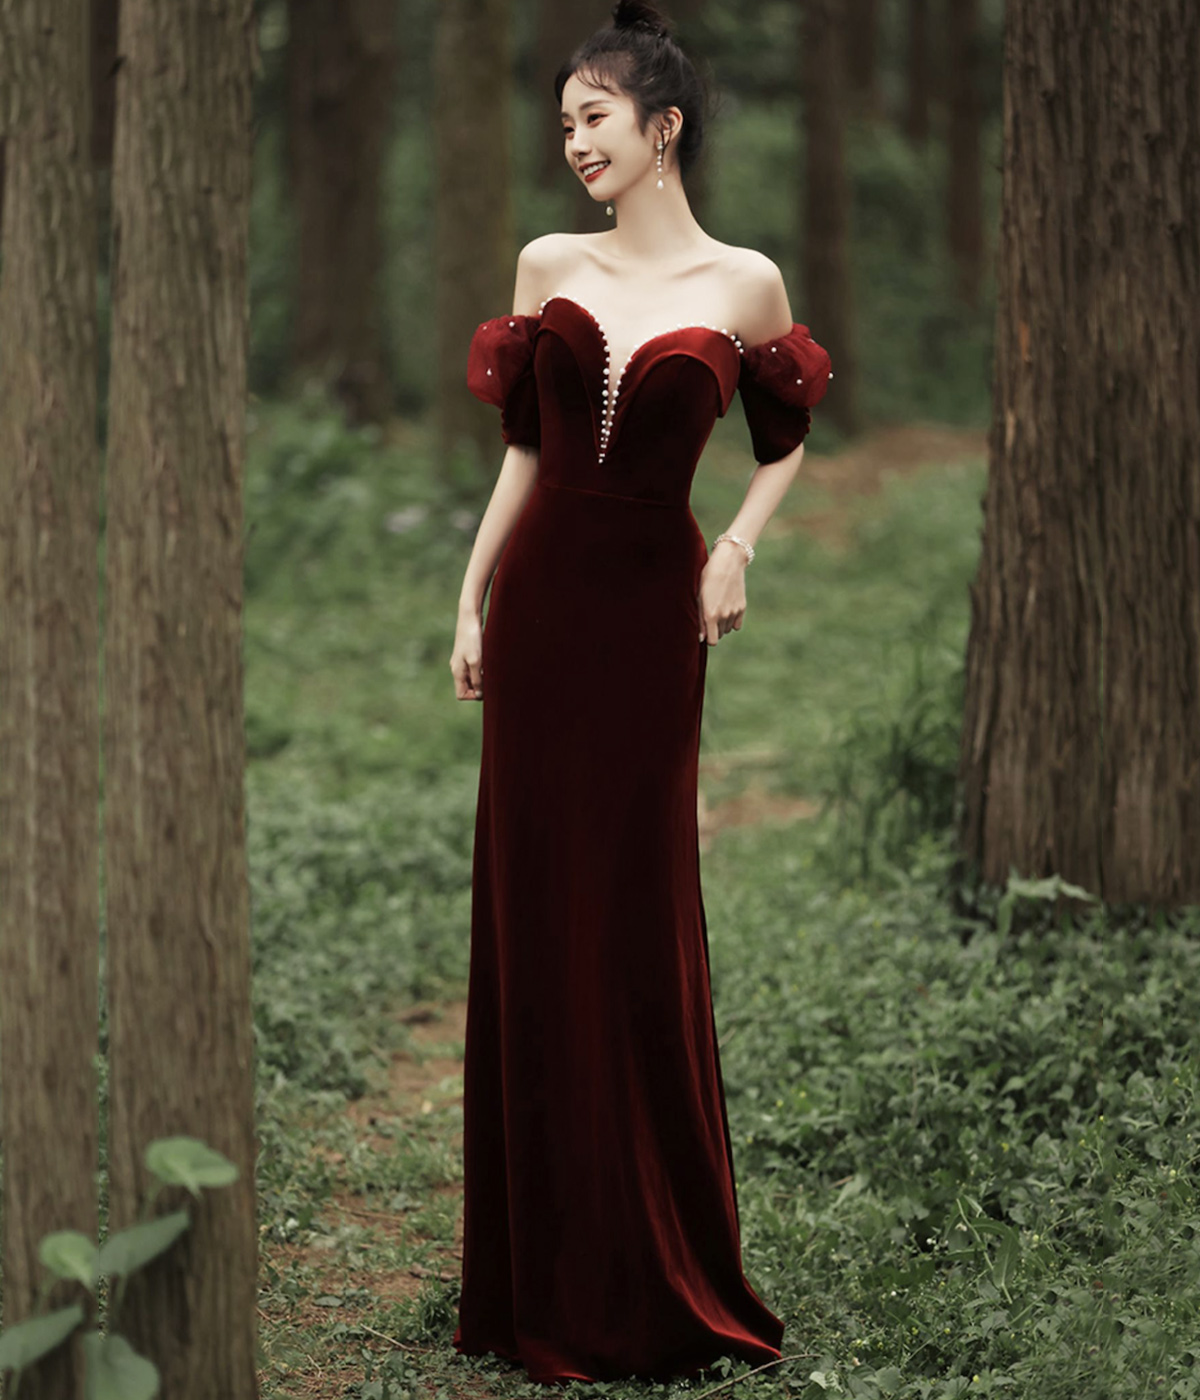 Burgundy Velvet Long Prom Dress With Pearls, Mermaid Off Shoulder Evening Party Dress